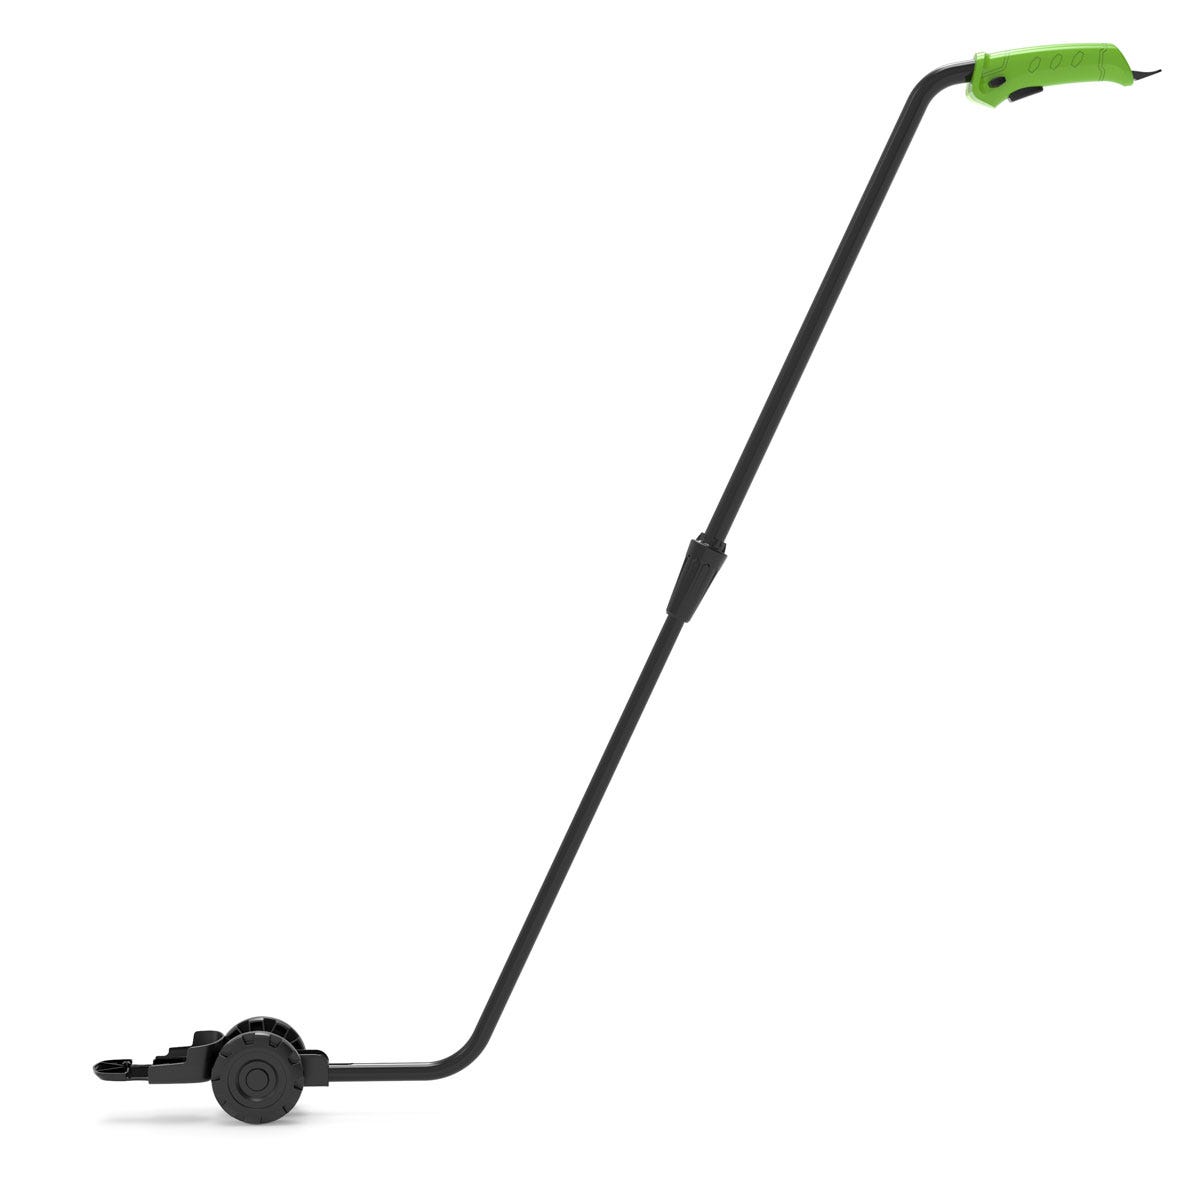 Greenworks Accessory Extension Pole for Grass Shears & Shrubber